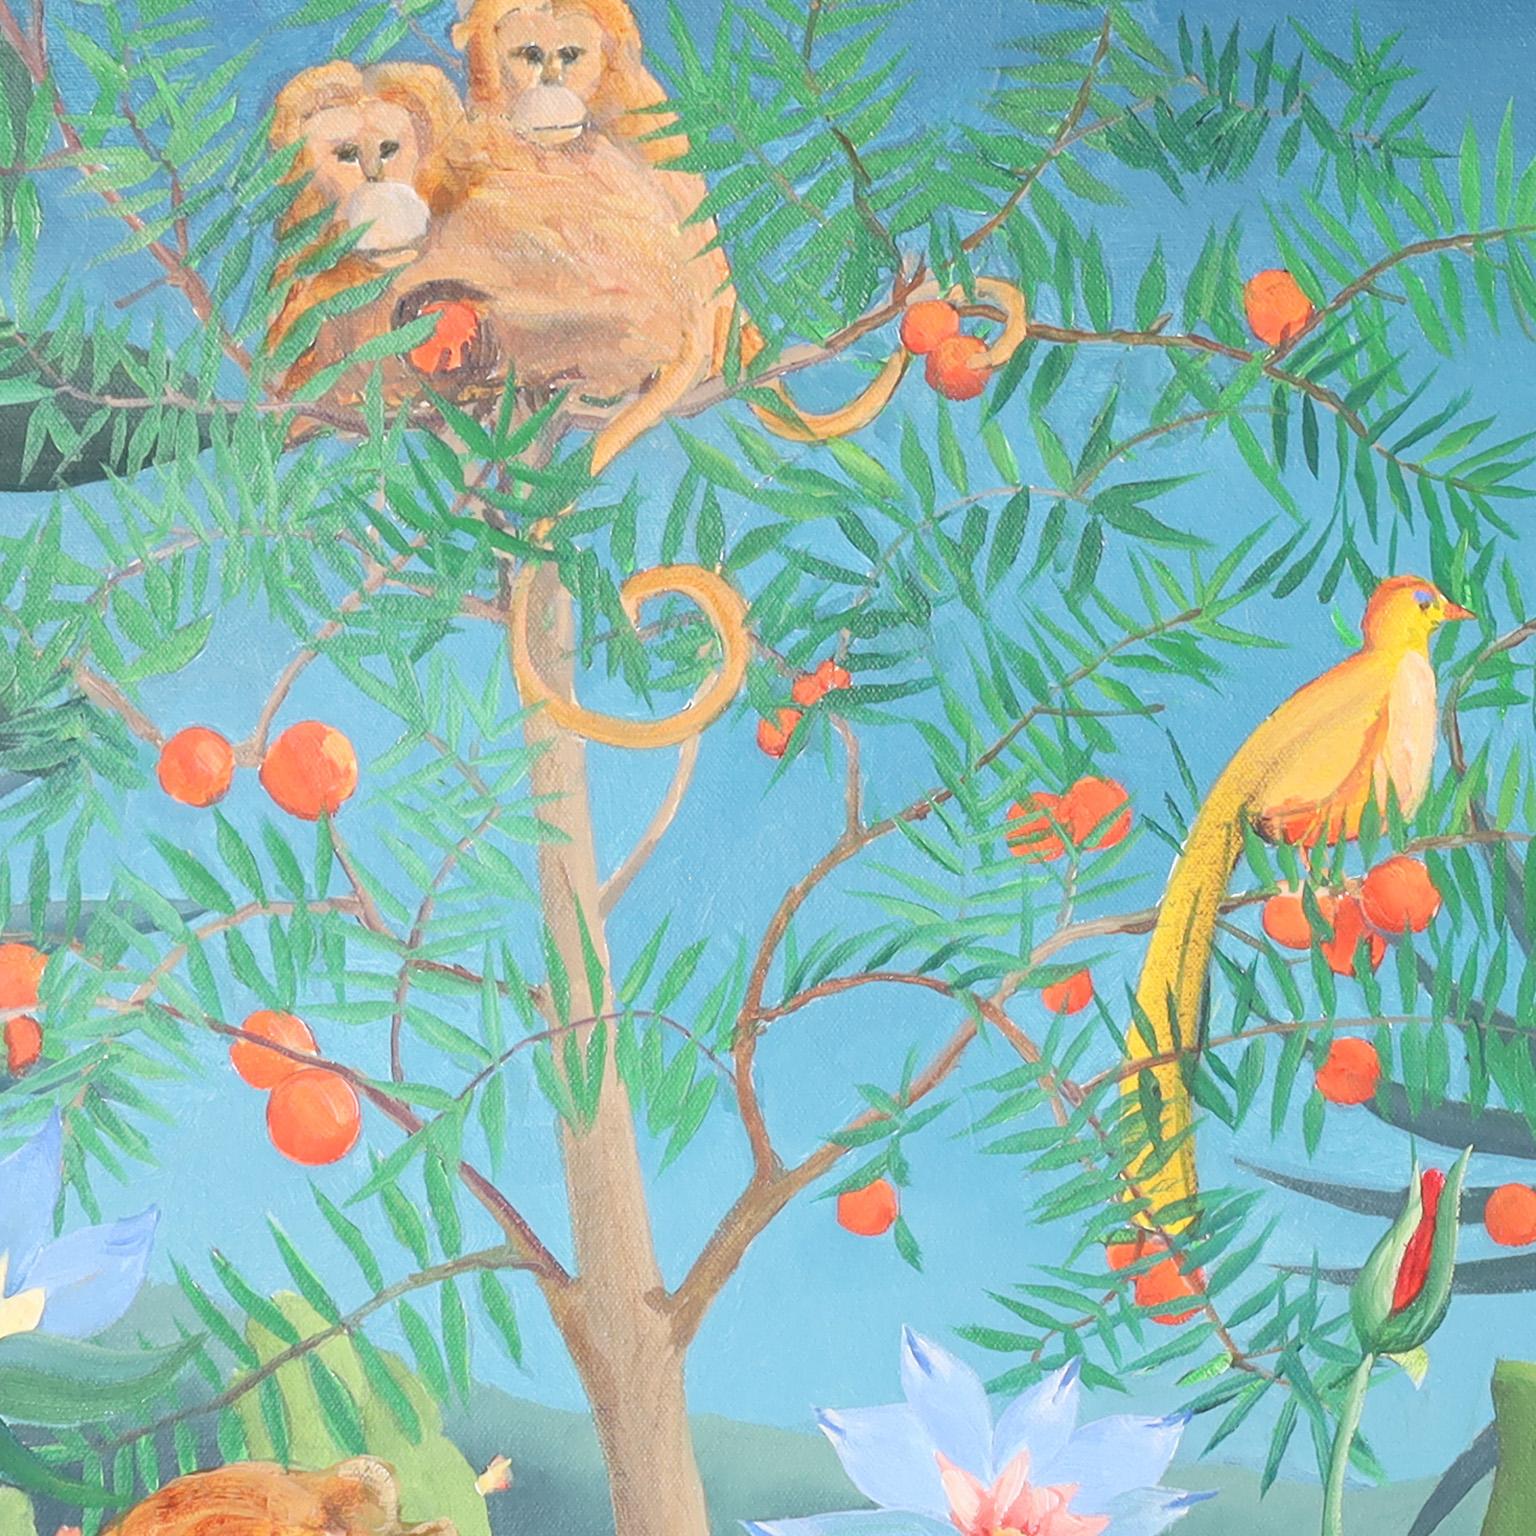 Whimsical acrylic painting on canvas that takes the colorful naive style of French painter Henri Rousseau to the next level with an addition of a woman lounging on a sofa in the middle of a jungle. Signed M R Marlatt 1990.